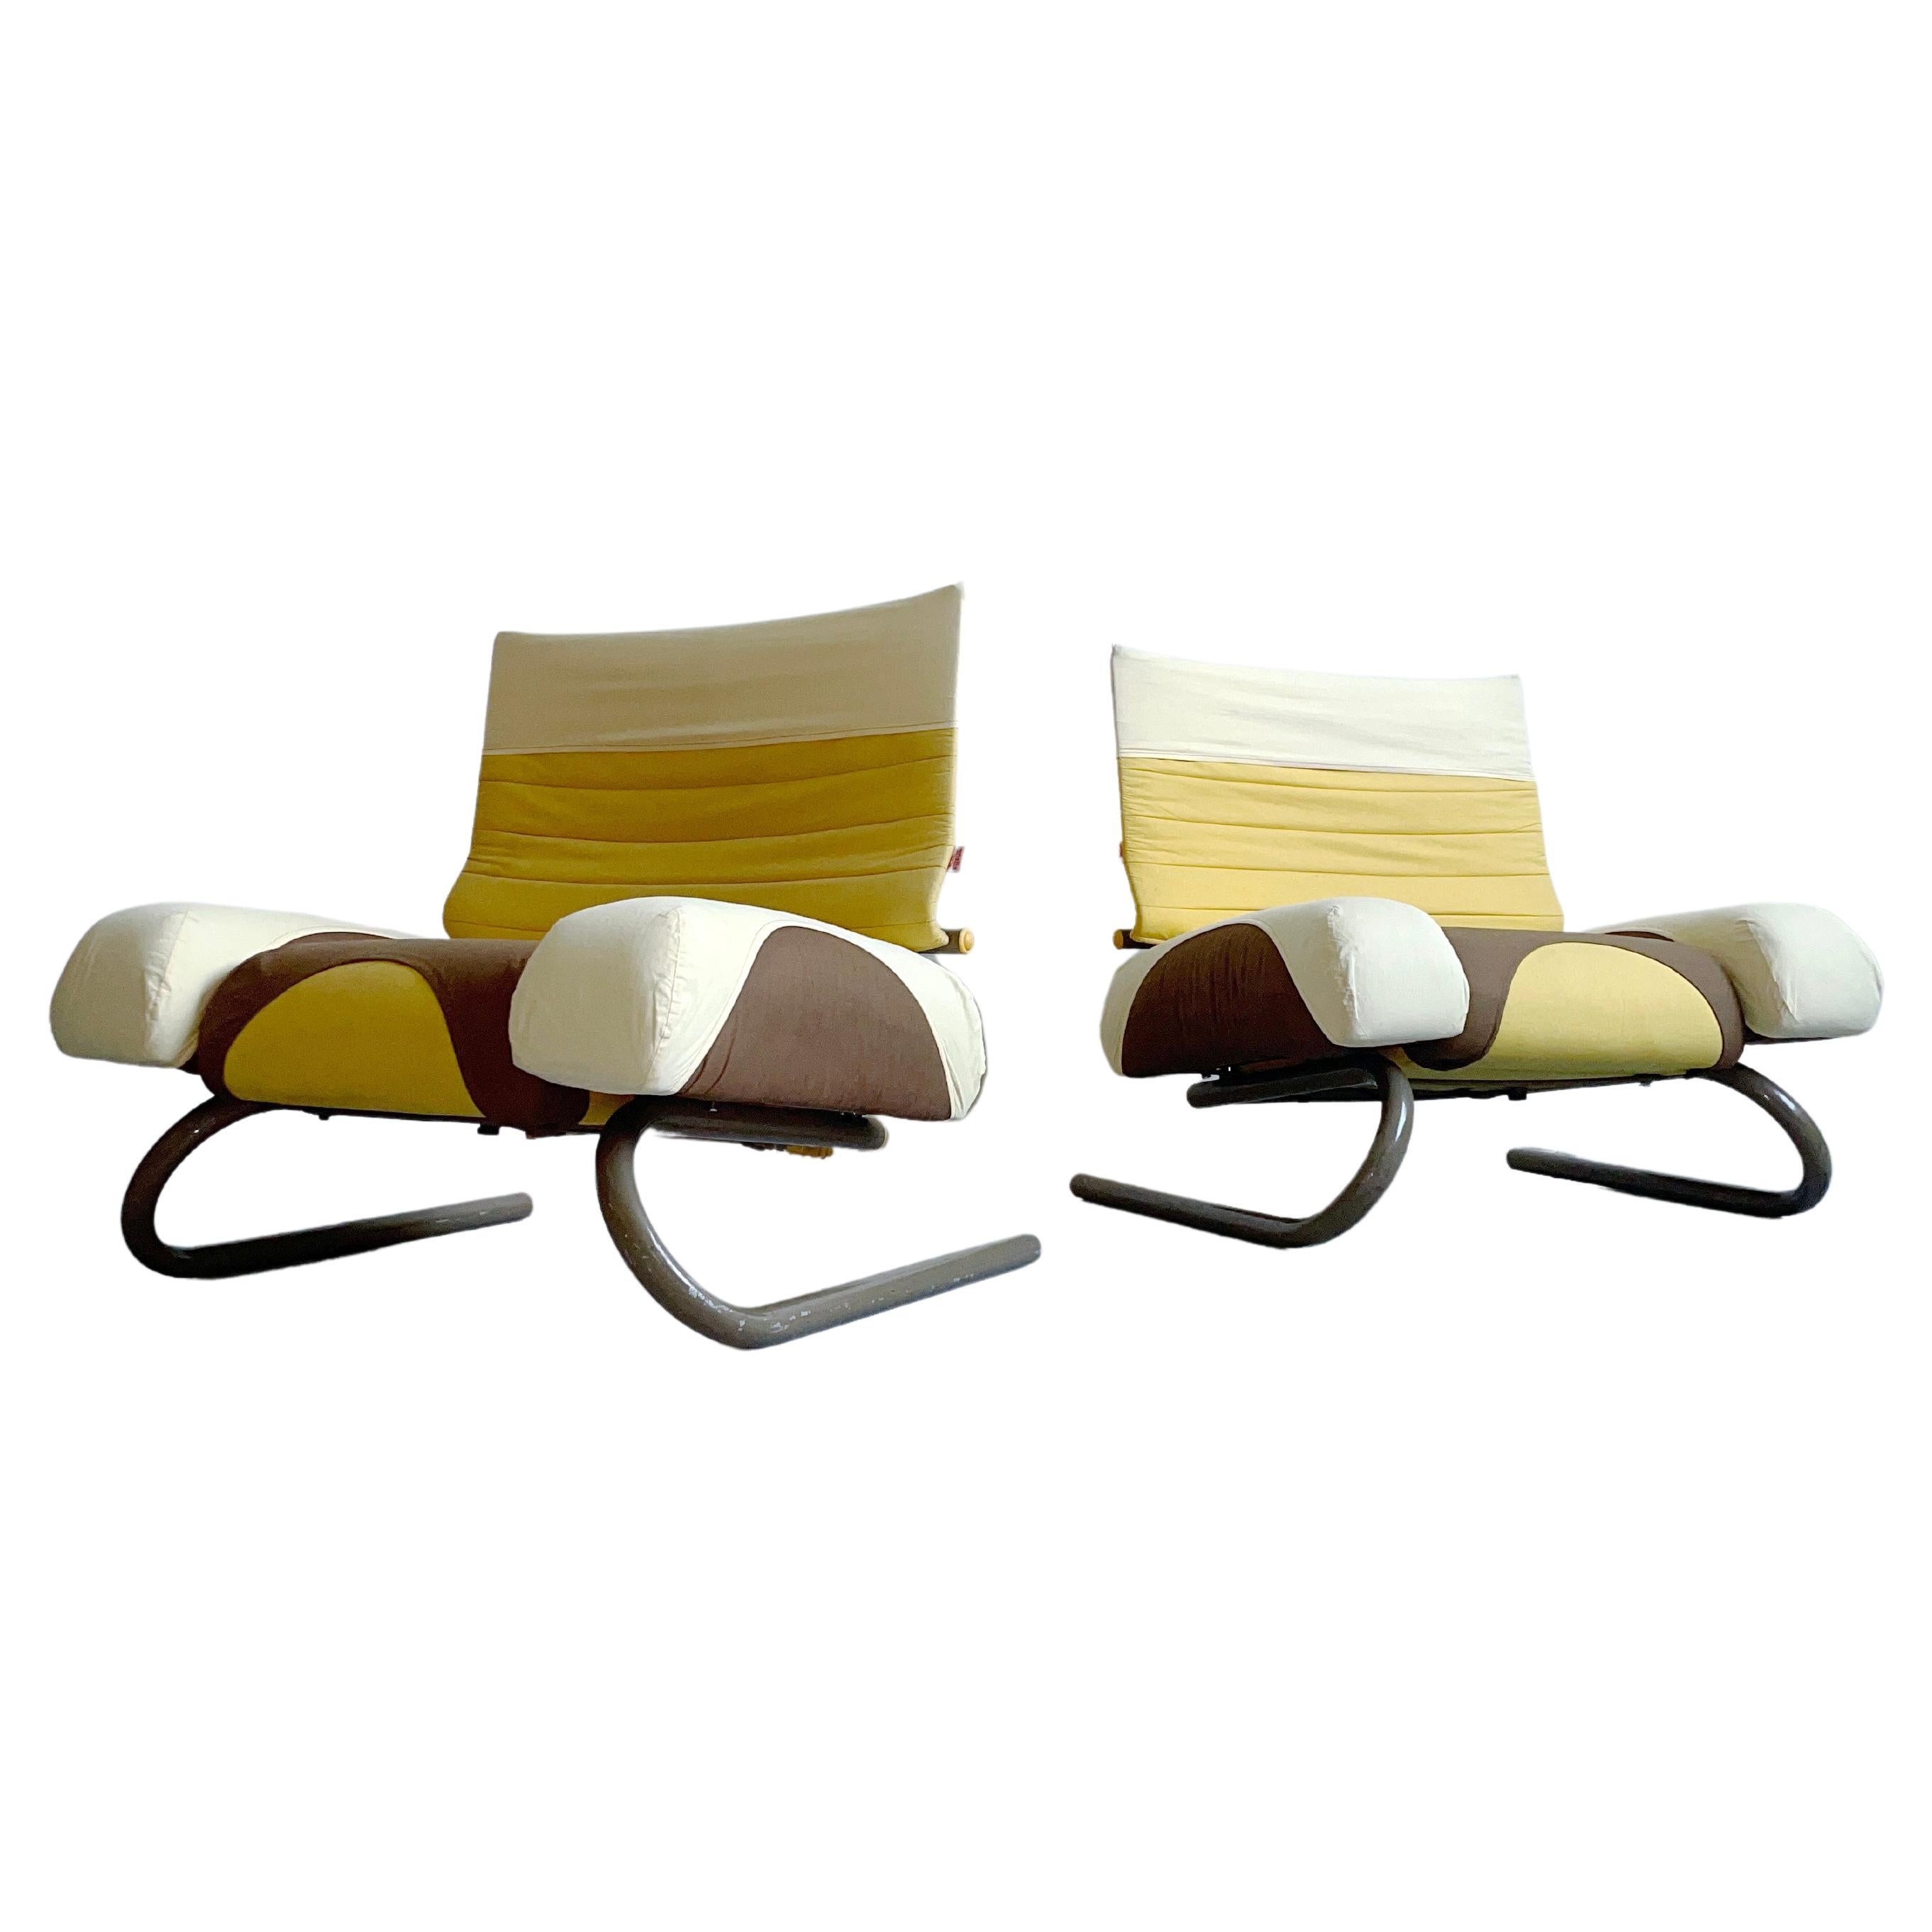 Michele de Lucchi Lounge Chairs